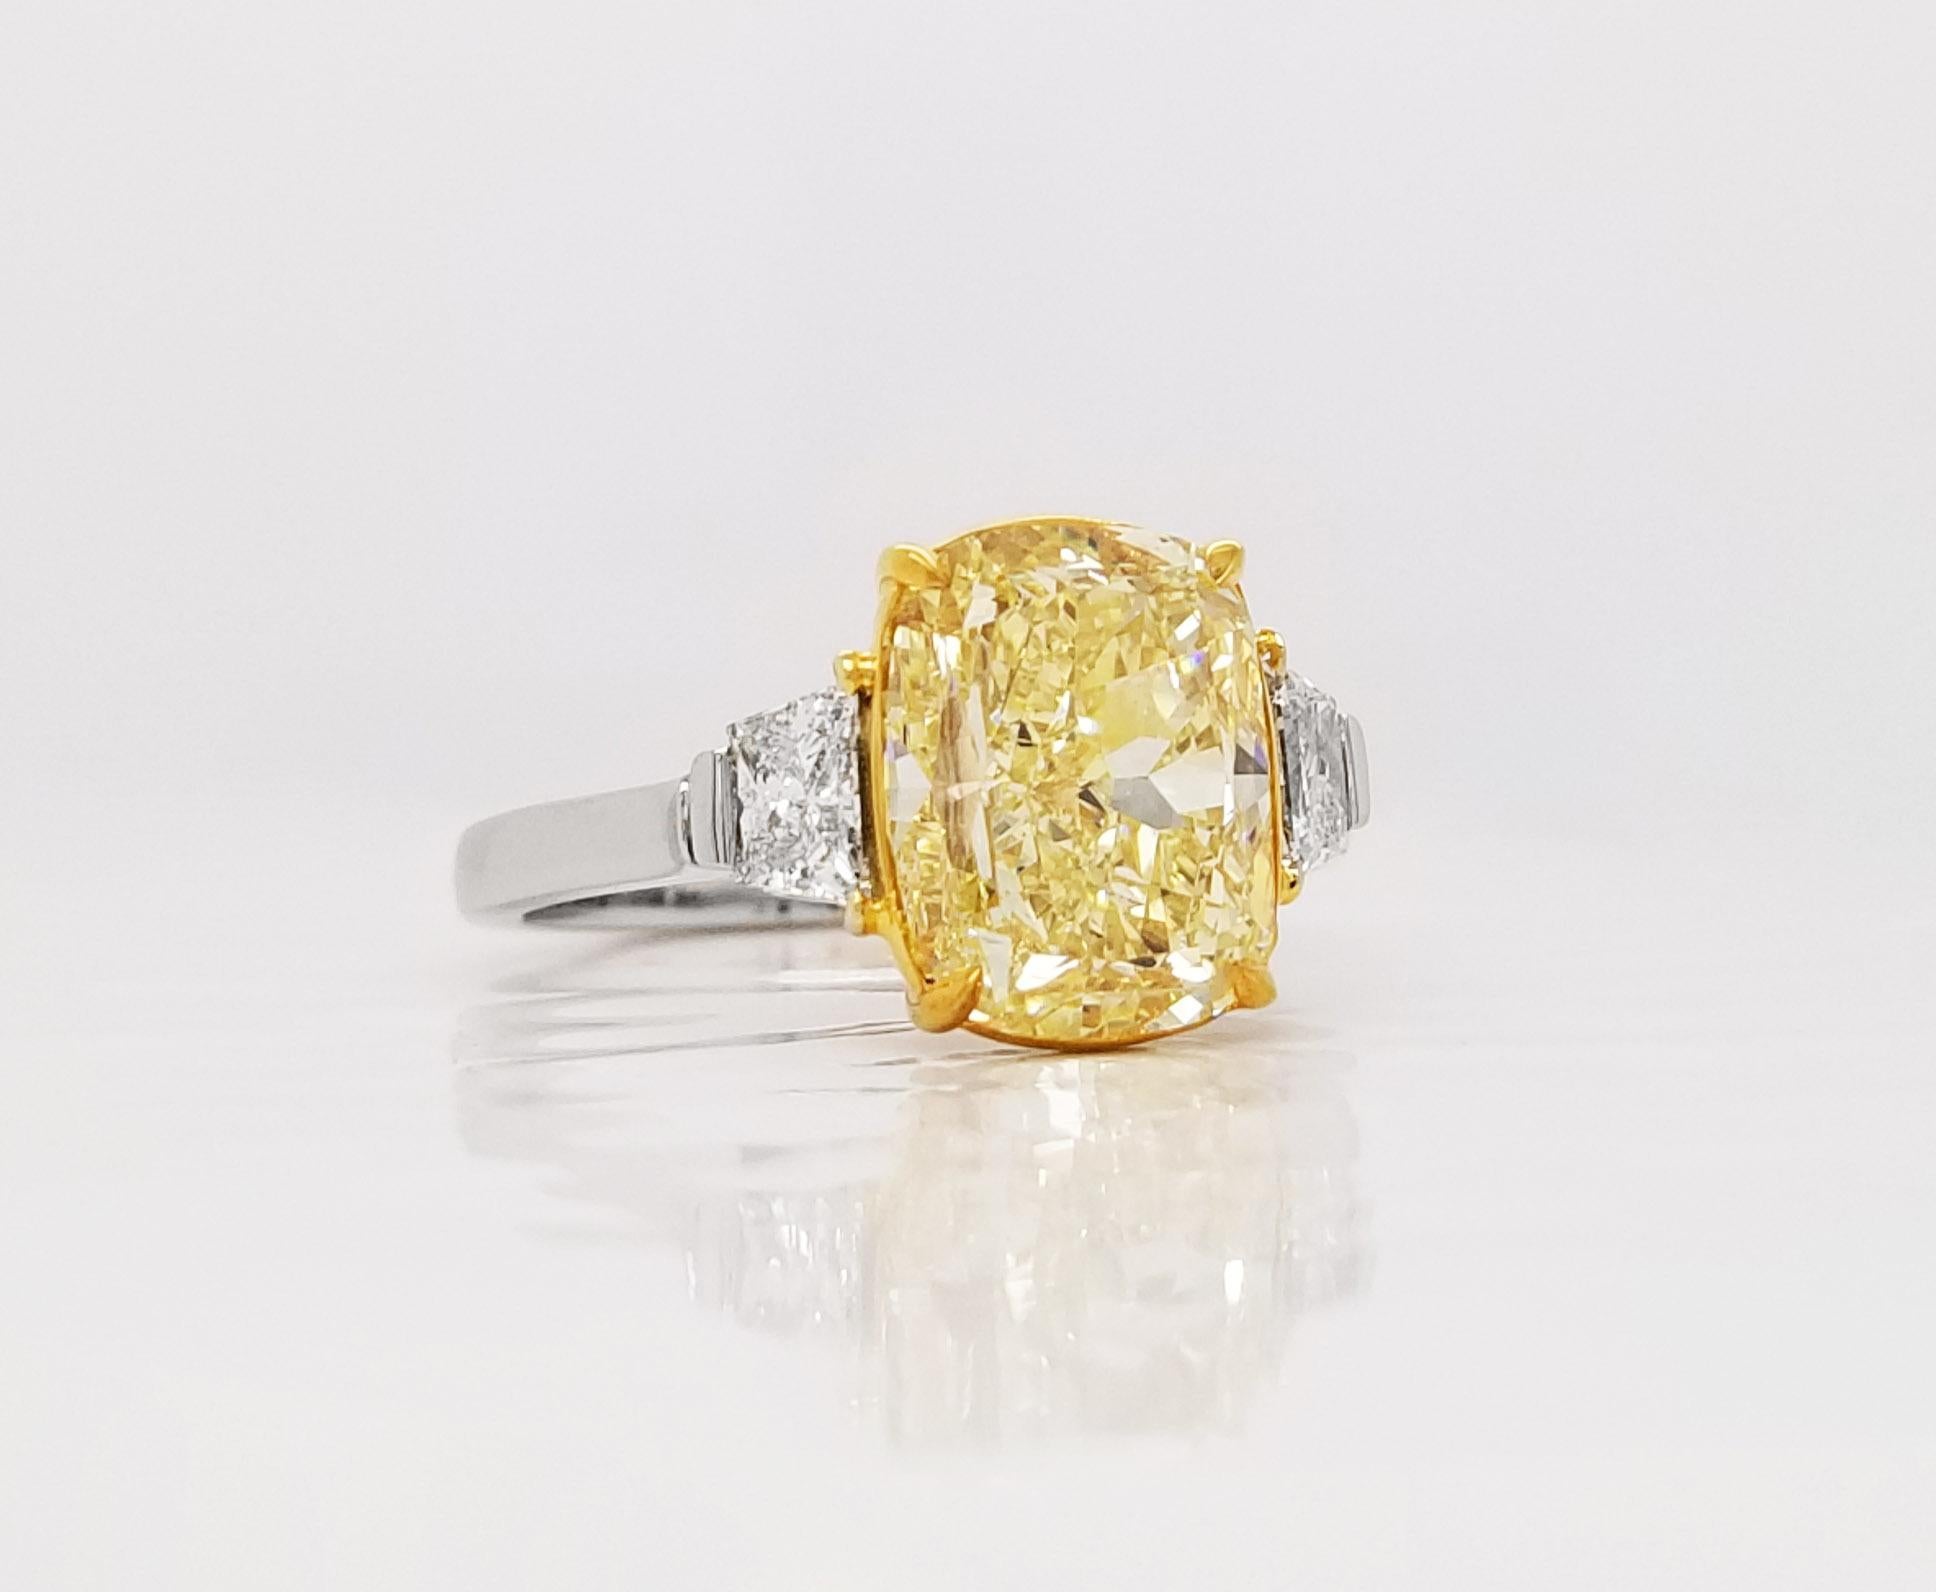 2022 is the Year of the yellow color Cushion Cut Engagement Ring  and this ring is perfection with a 4.01 carat Fancy Yellow Cushion Cut Diamond of  VVS2 clarity, GIA Certified,  with .47 carats in F Color side trapezoid cut diamonds in Platinum and